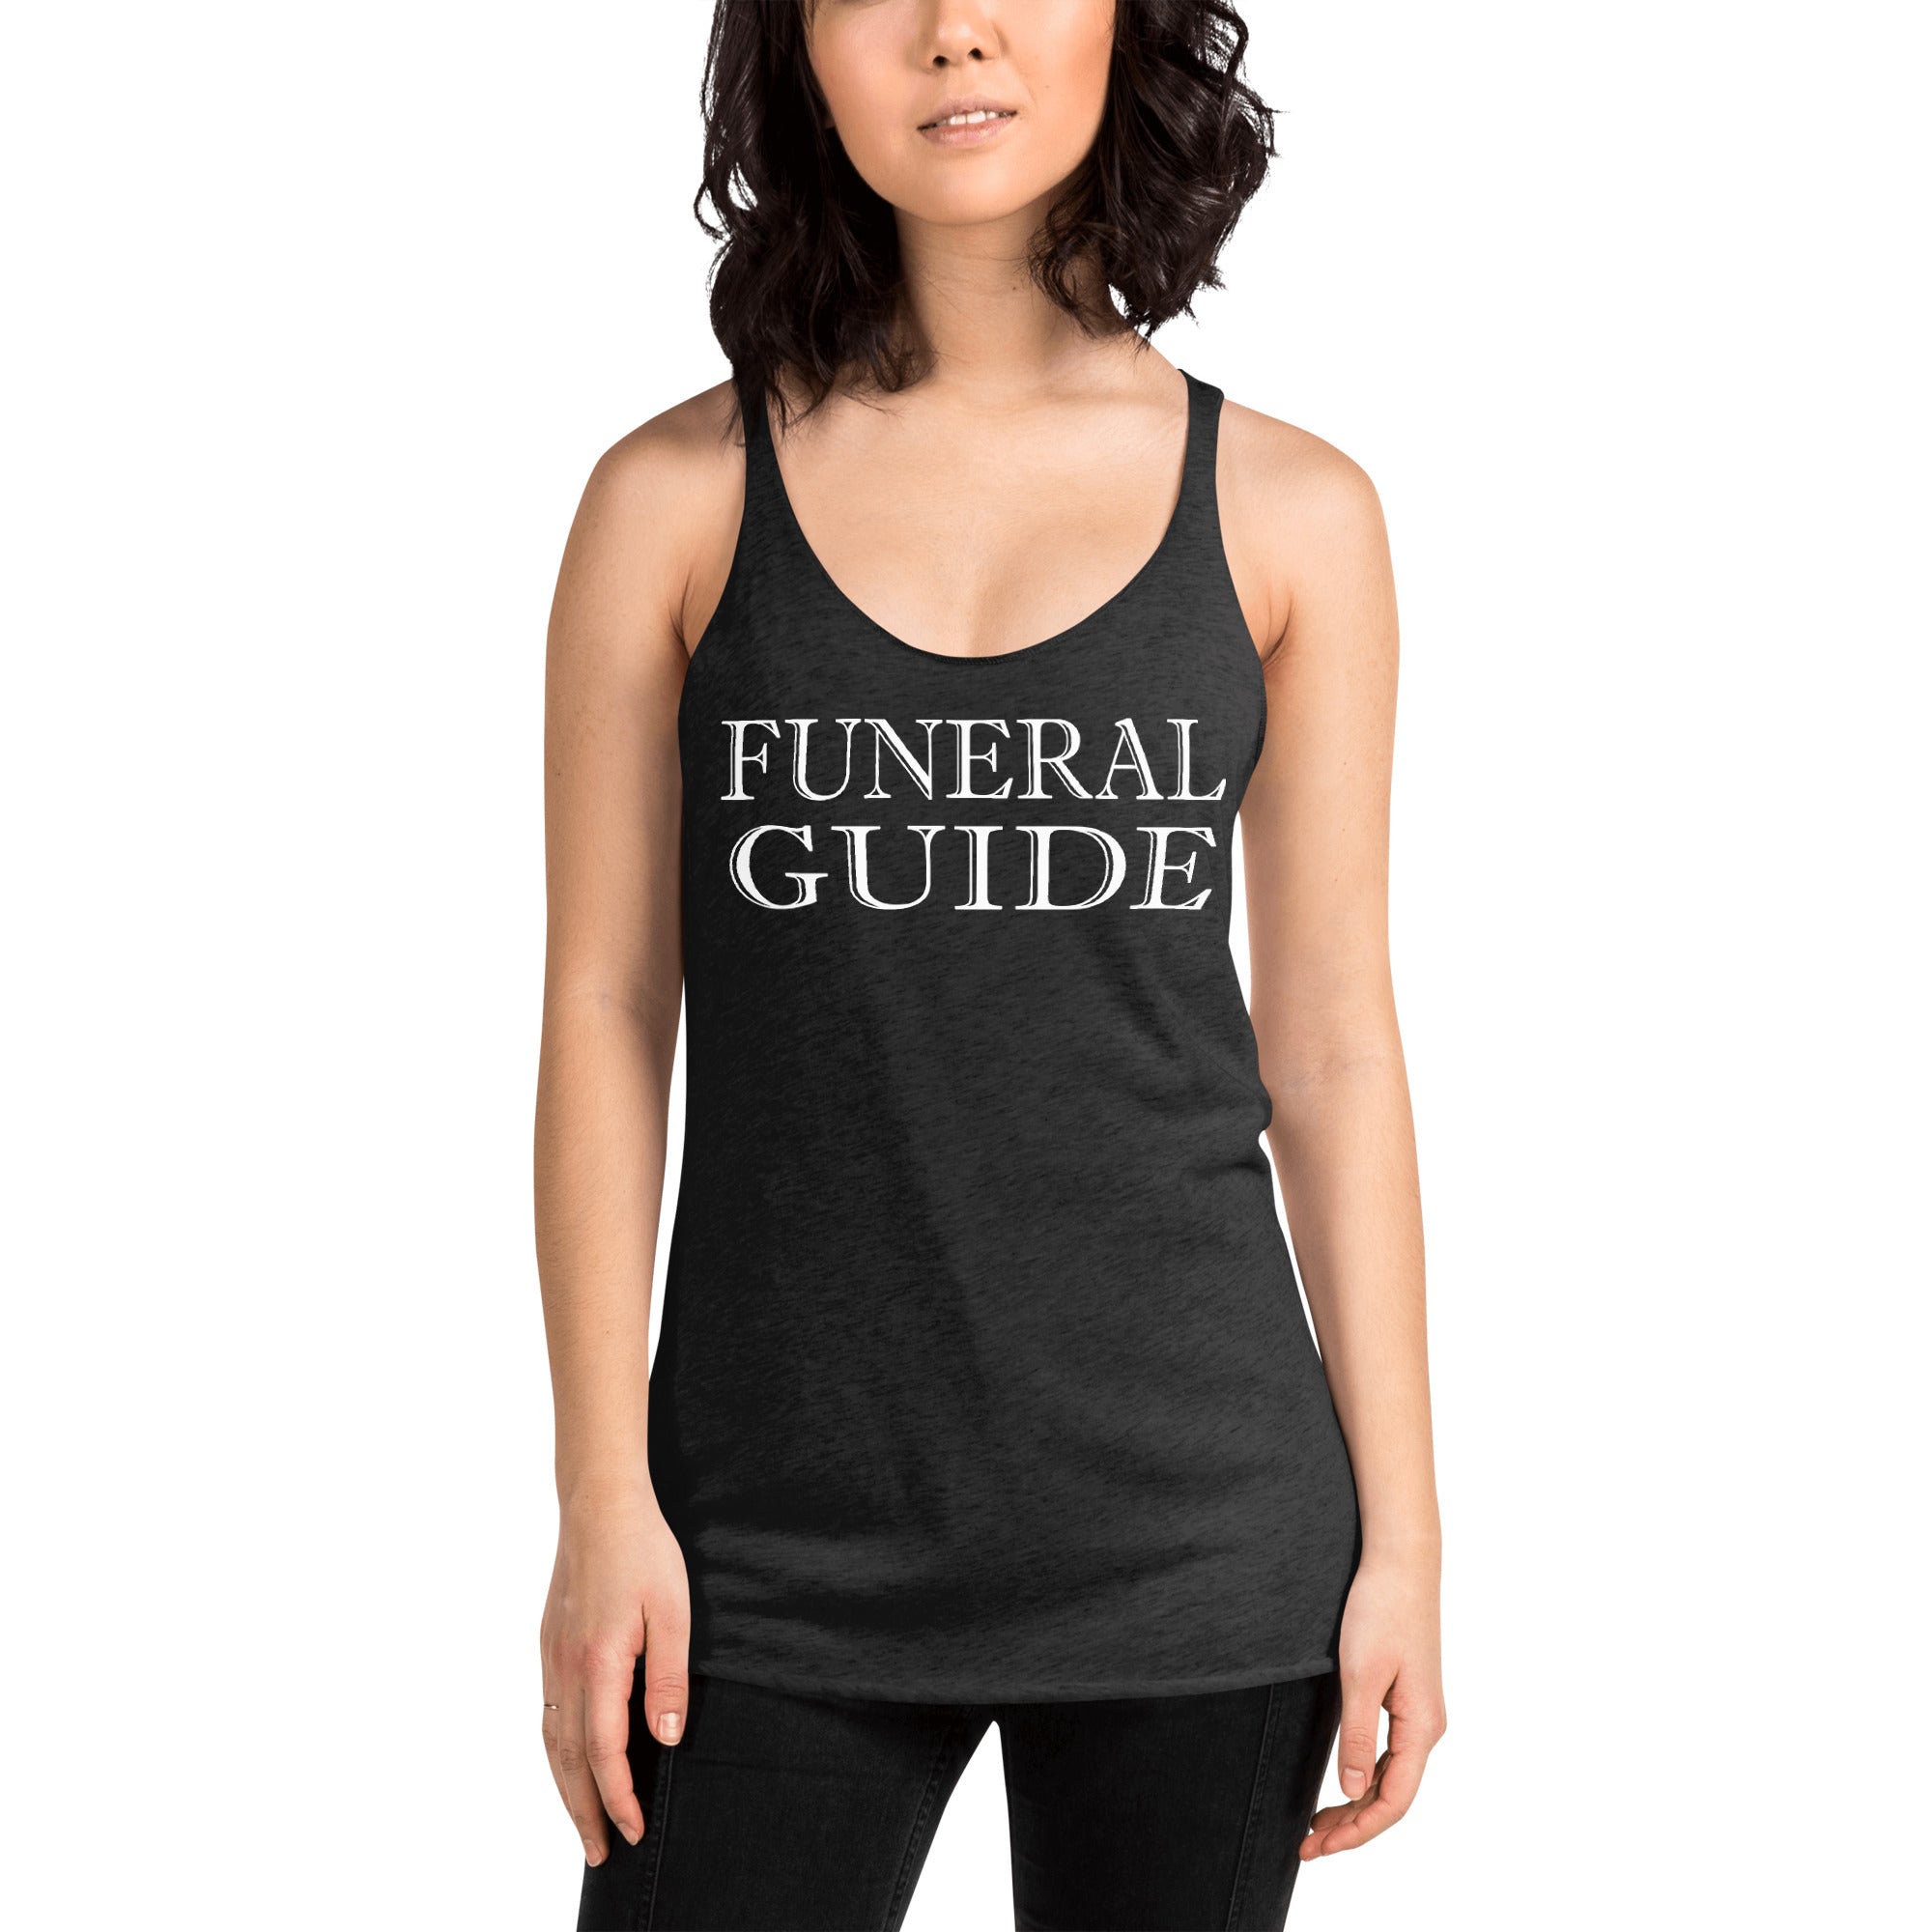 Funeral Guide Gothic Mortician Style Women's Racerback Tank Top Shirt - Edge of Life Designs